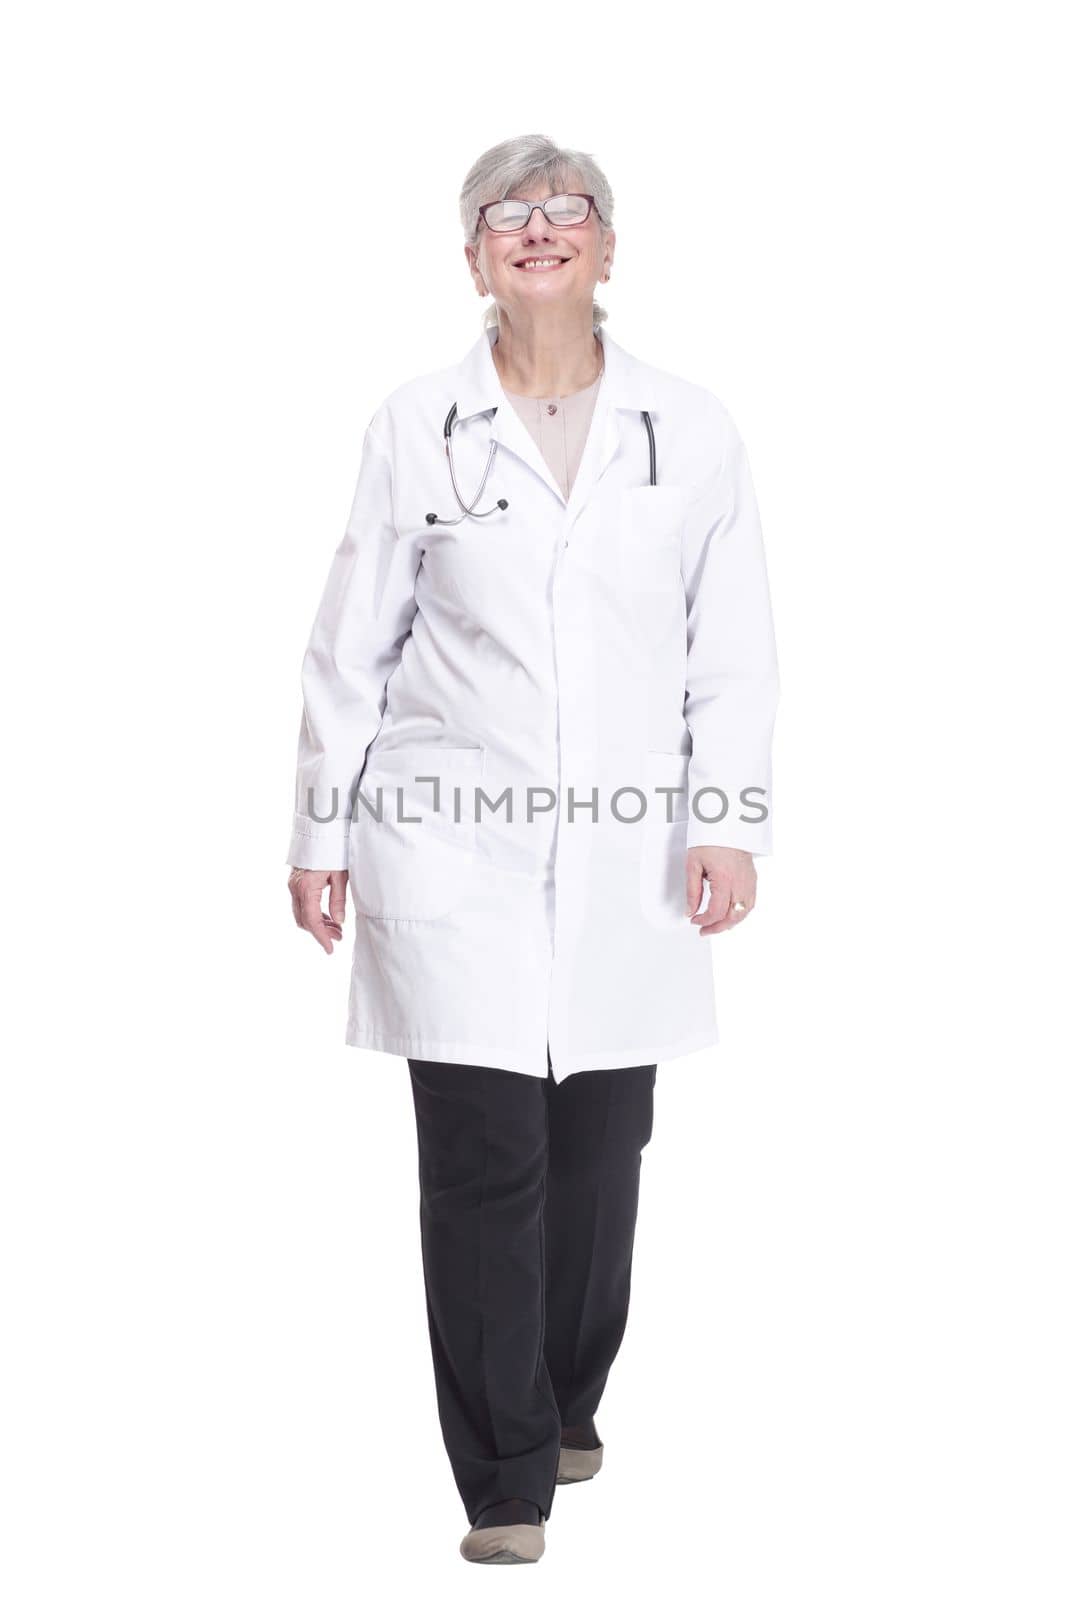 in full growth. happy woman doctor striding forward. isolated on a white background.